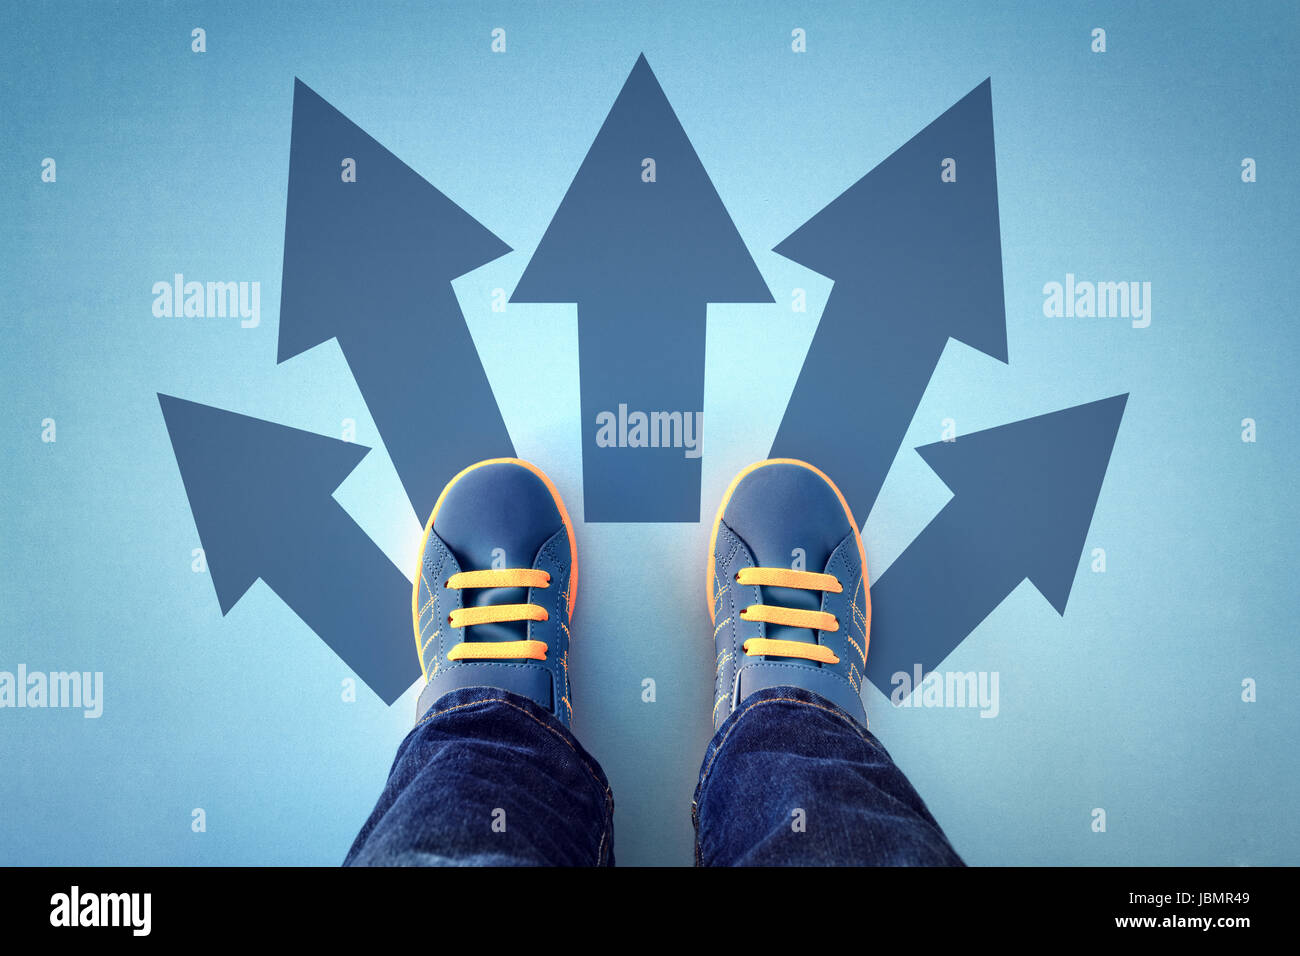 Taking decisions for the future child standing with many direction arrow choices, left, right or move forward Stock Photo